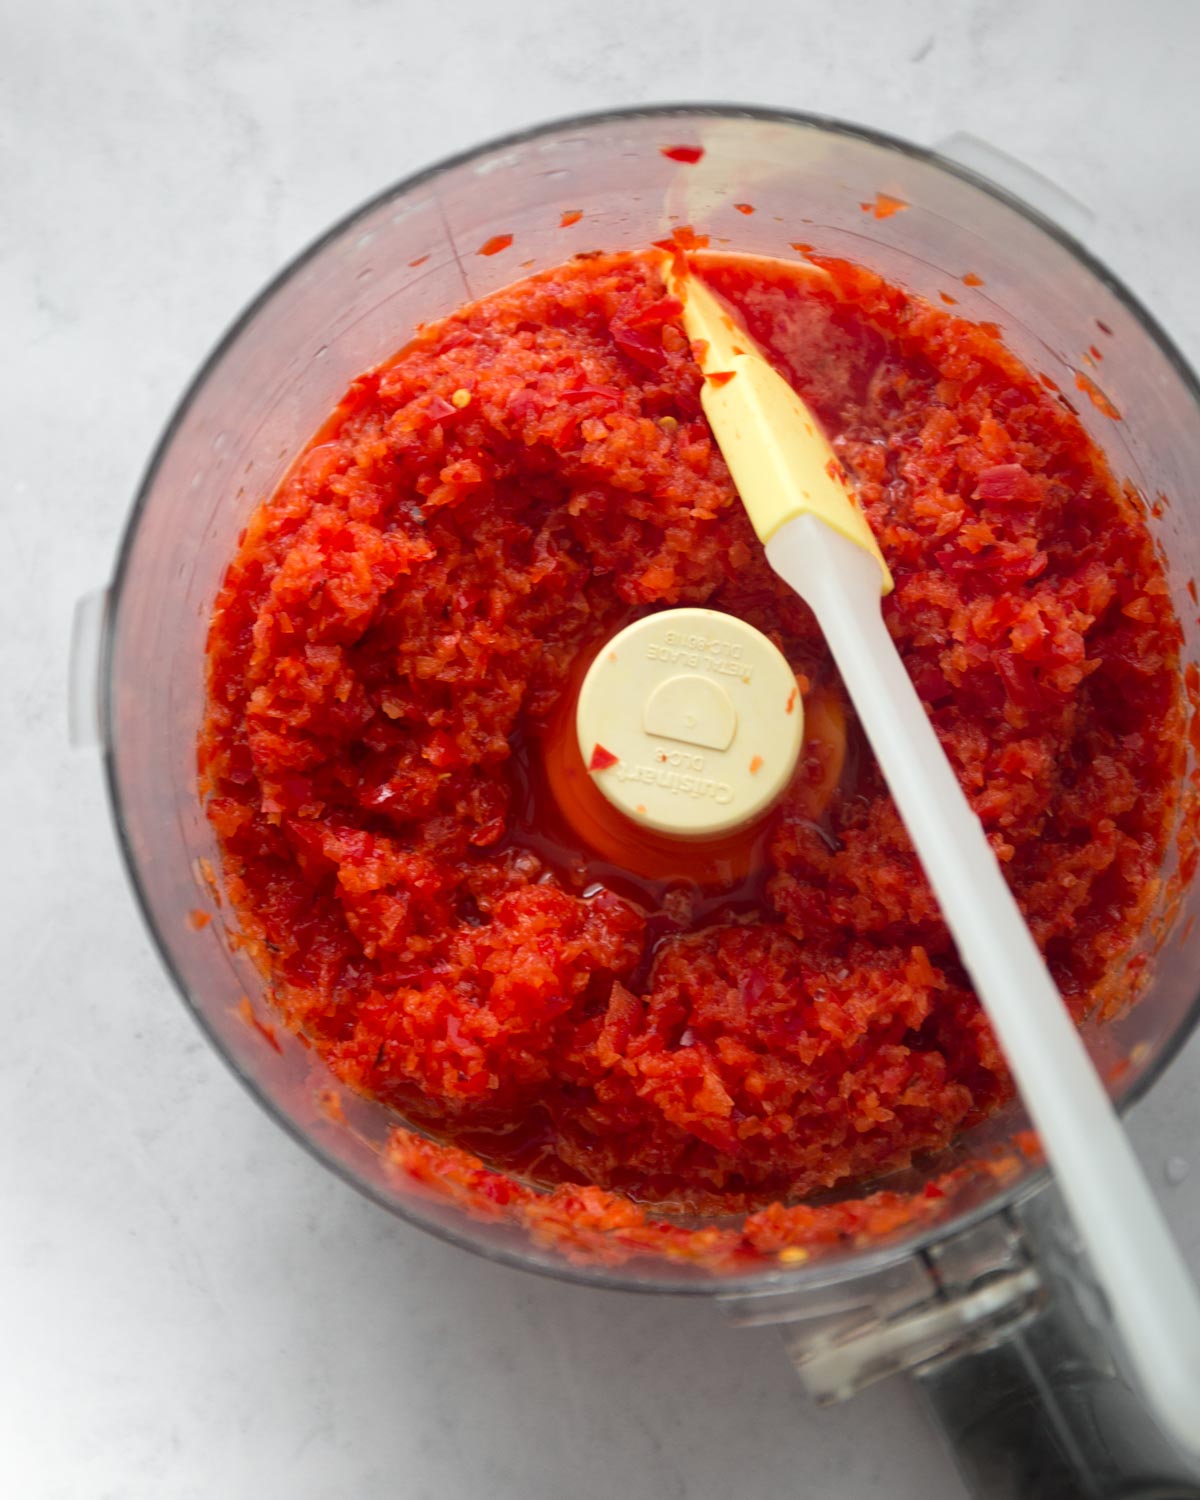 puree of red pepper in a food processor